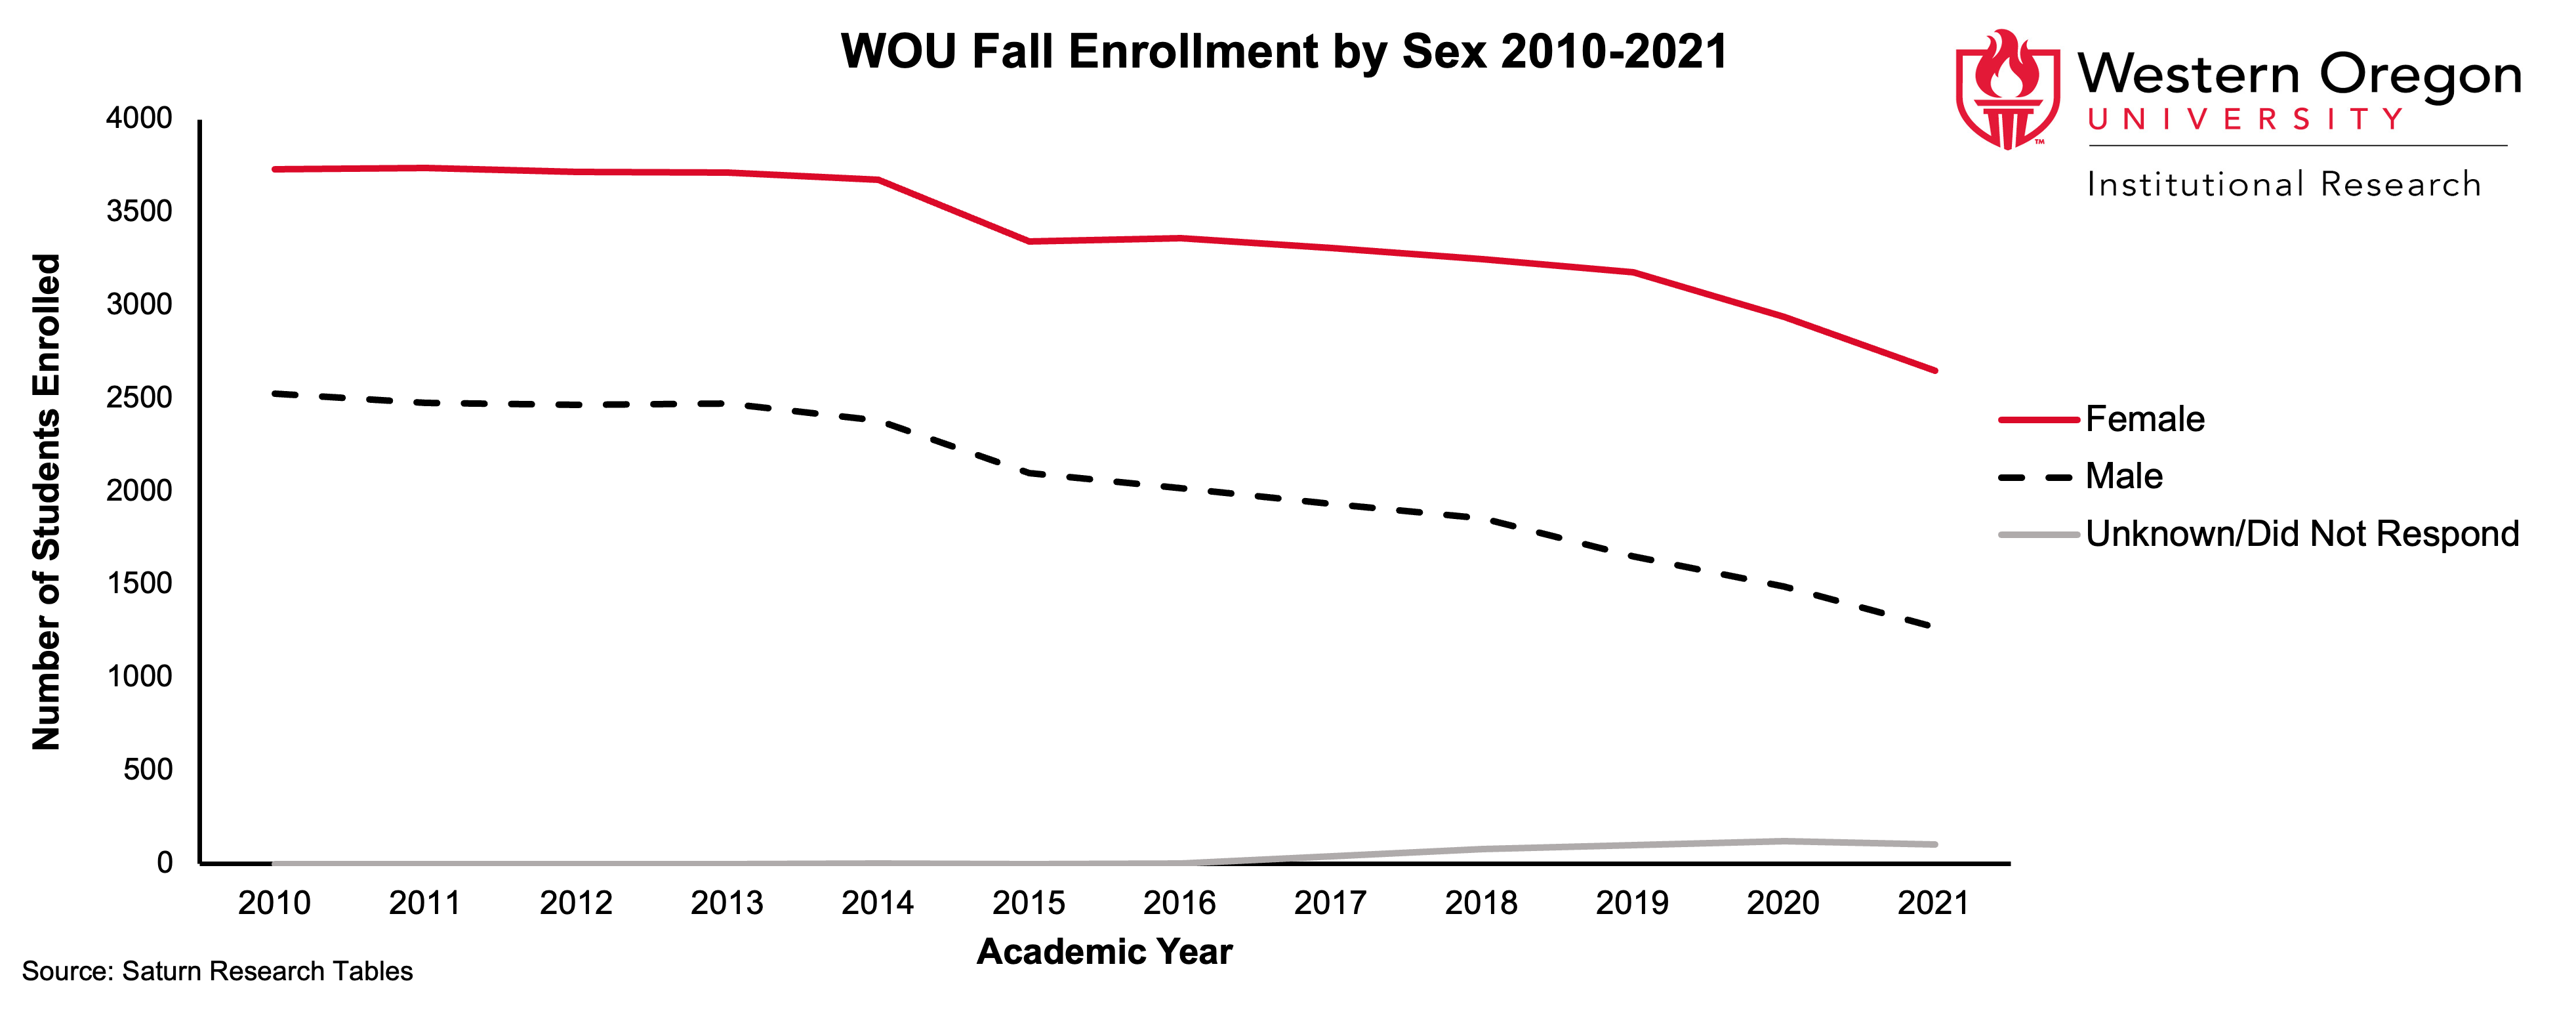 Bar graph of Fall enrollment counts since Fall 2010 for WOU students, showing that enrollment has been steadily declining since Fall 2010 for each student group except students for which sex is unknown/did not respond